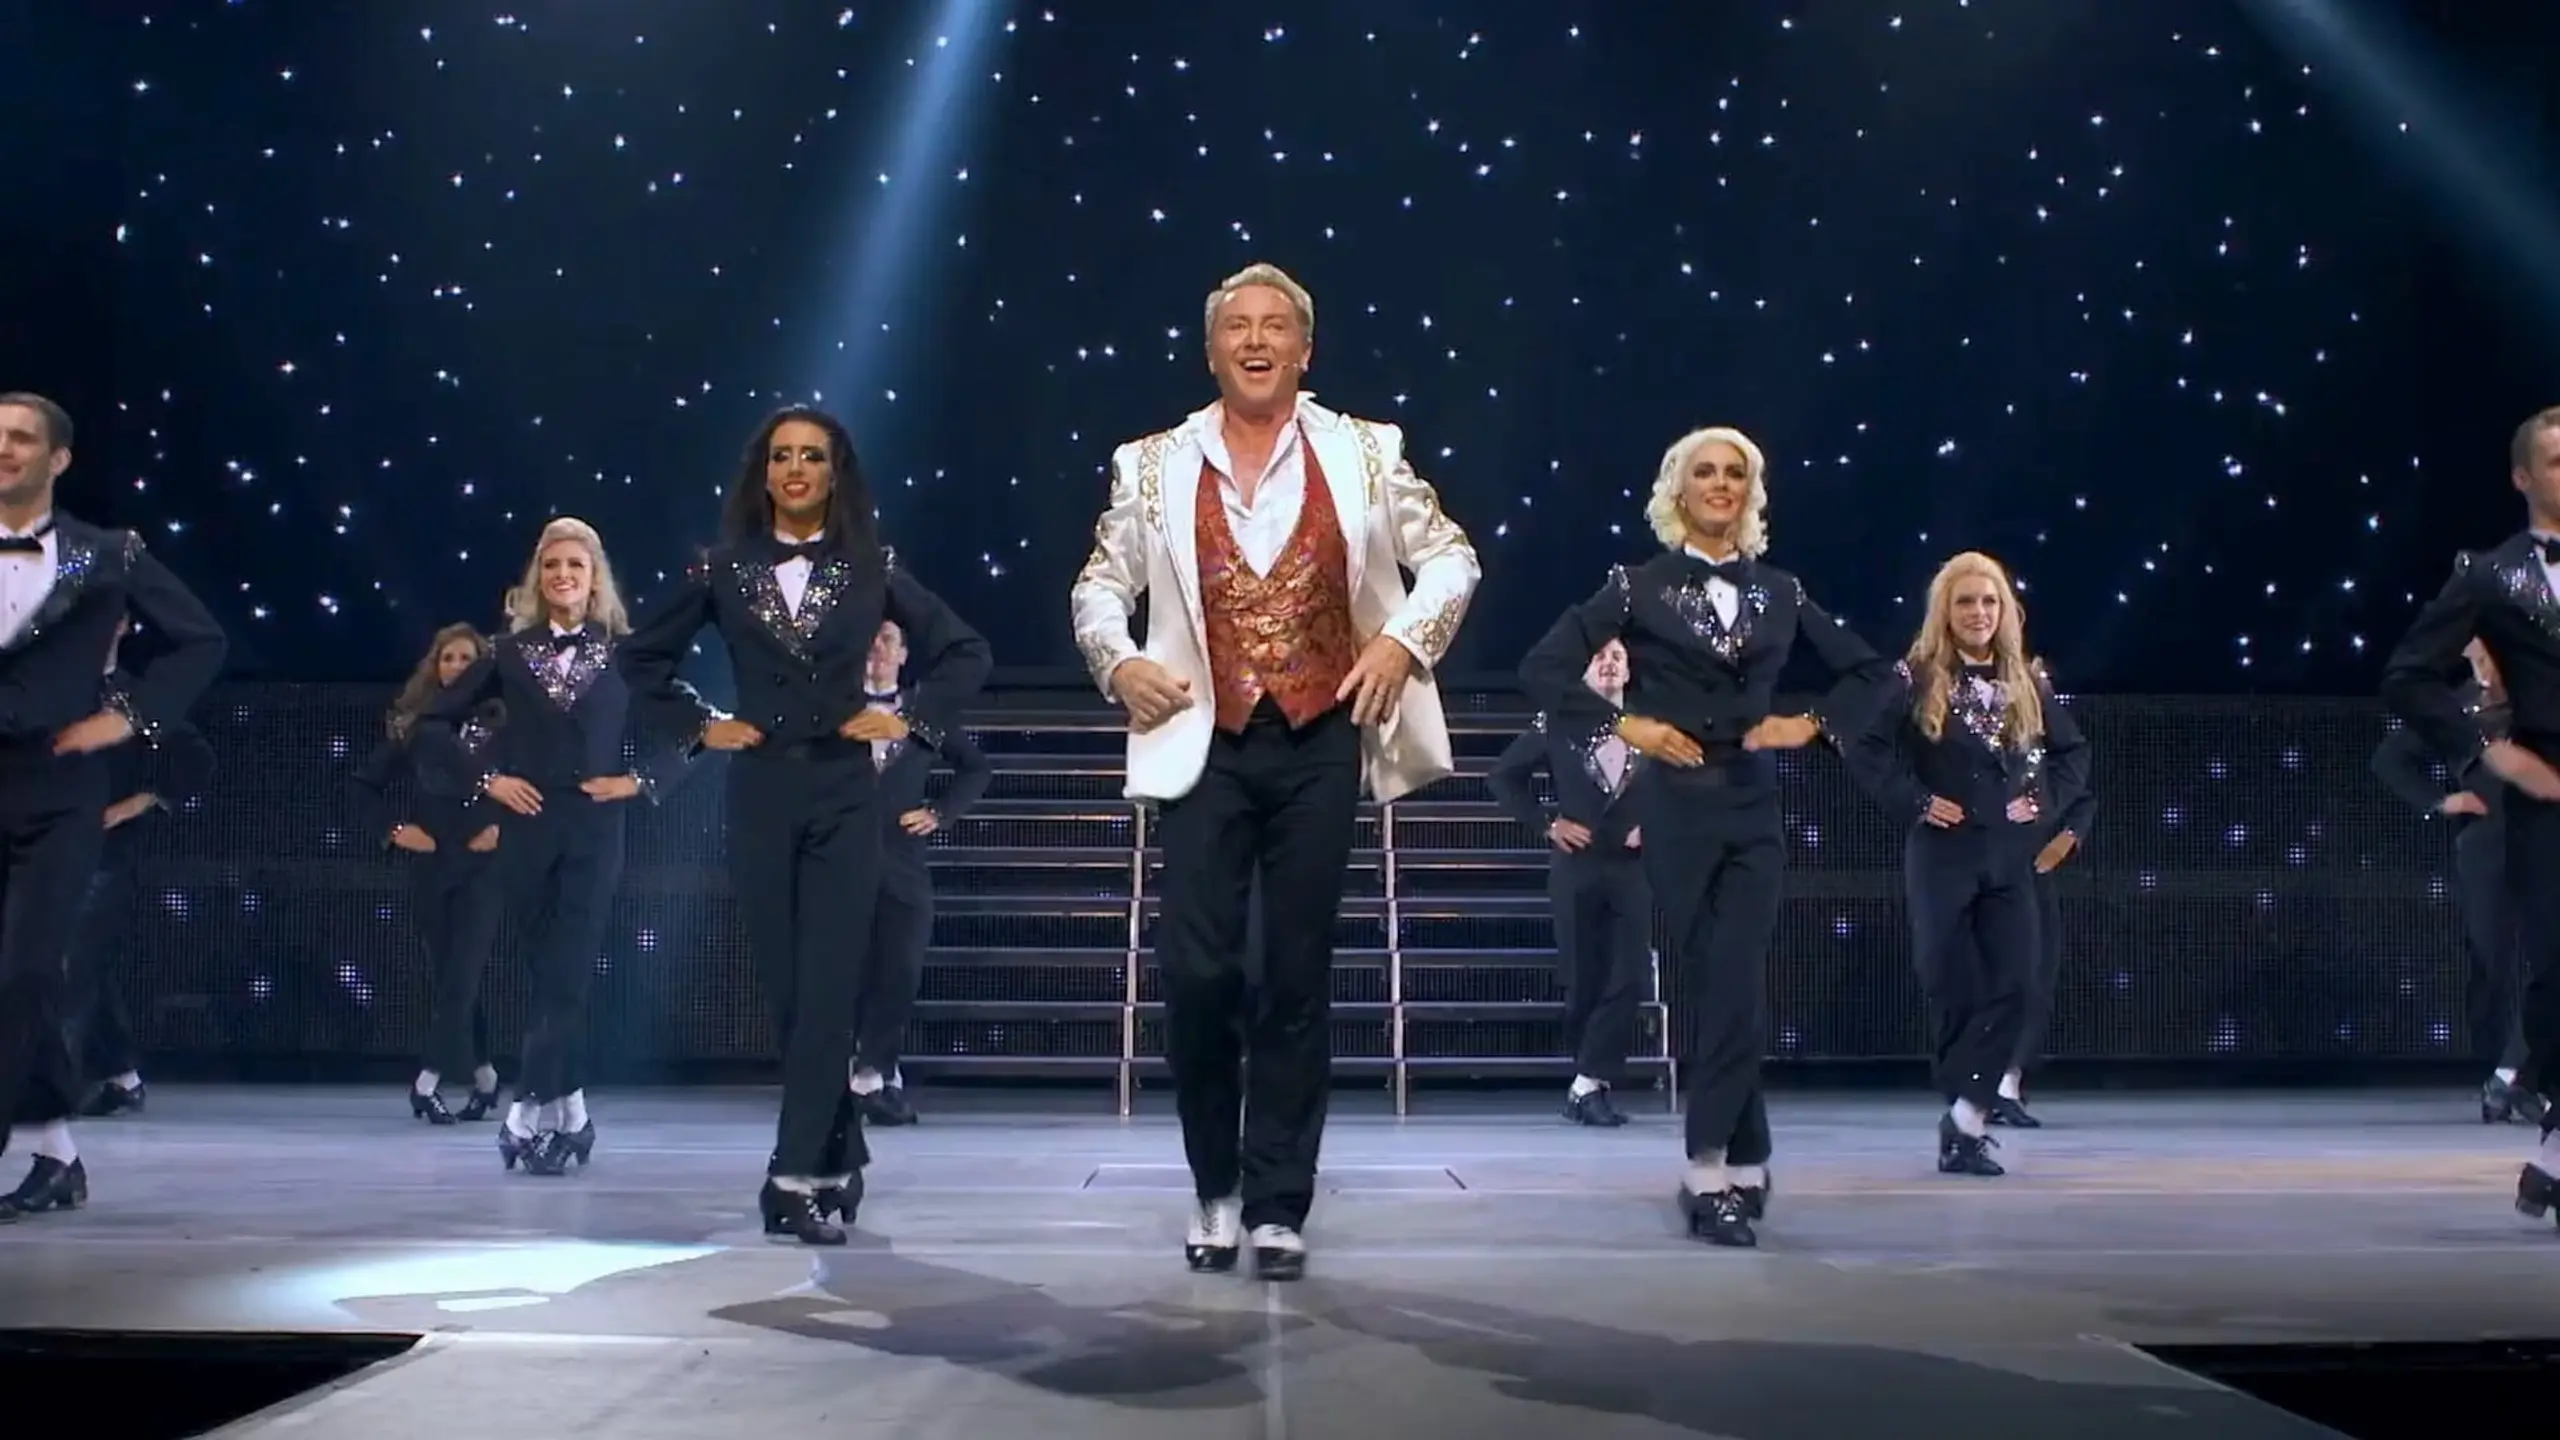 Michael Flatley - Lord of the Dance - Dangerous Games